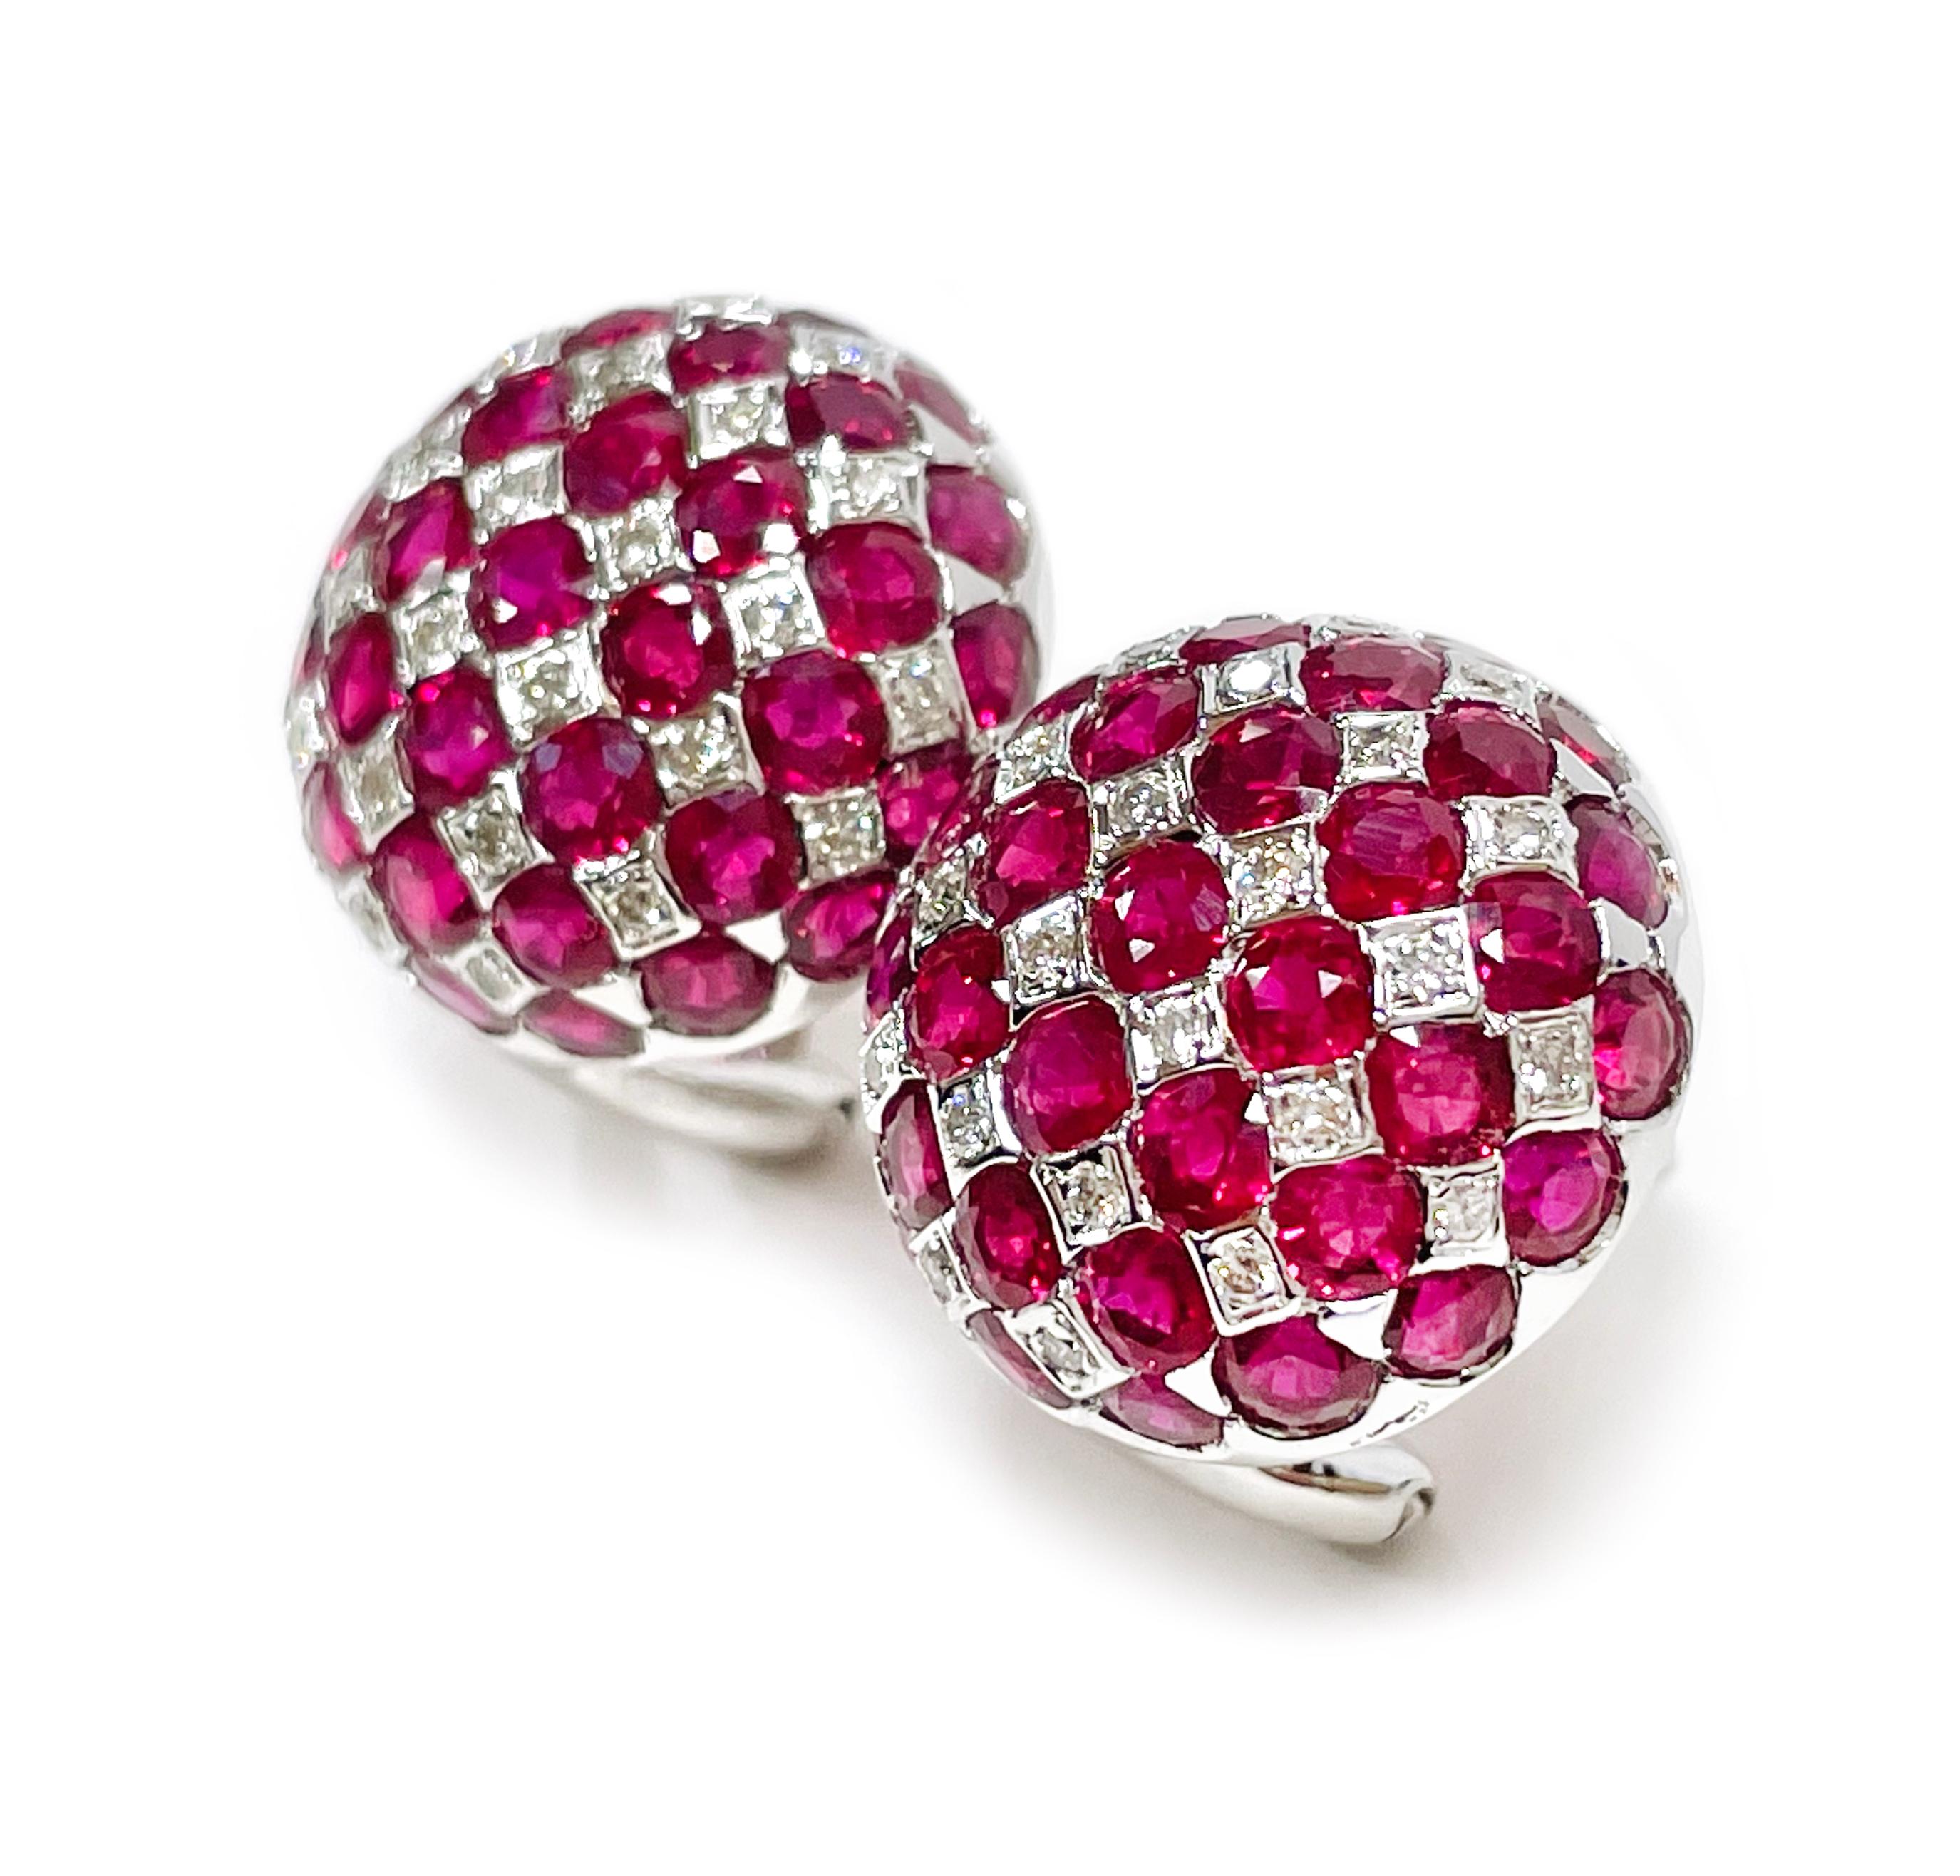 18 Karat White Gold Ruby Diamond Earrings. The earrings feature seventy-four pavé-set 3.0mm round rubies and forty-eight round melee pave-set diamonds in a checkerboard pattern. The rubies have a total carat weight of 9.62ctw and the diamonds total